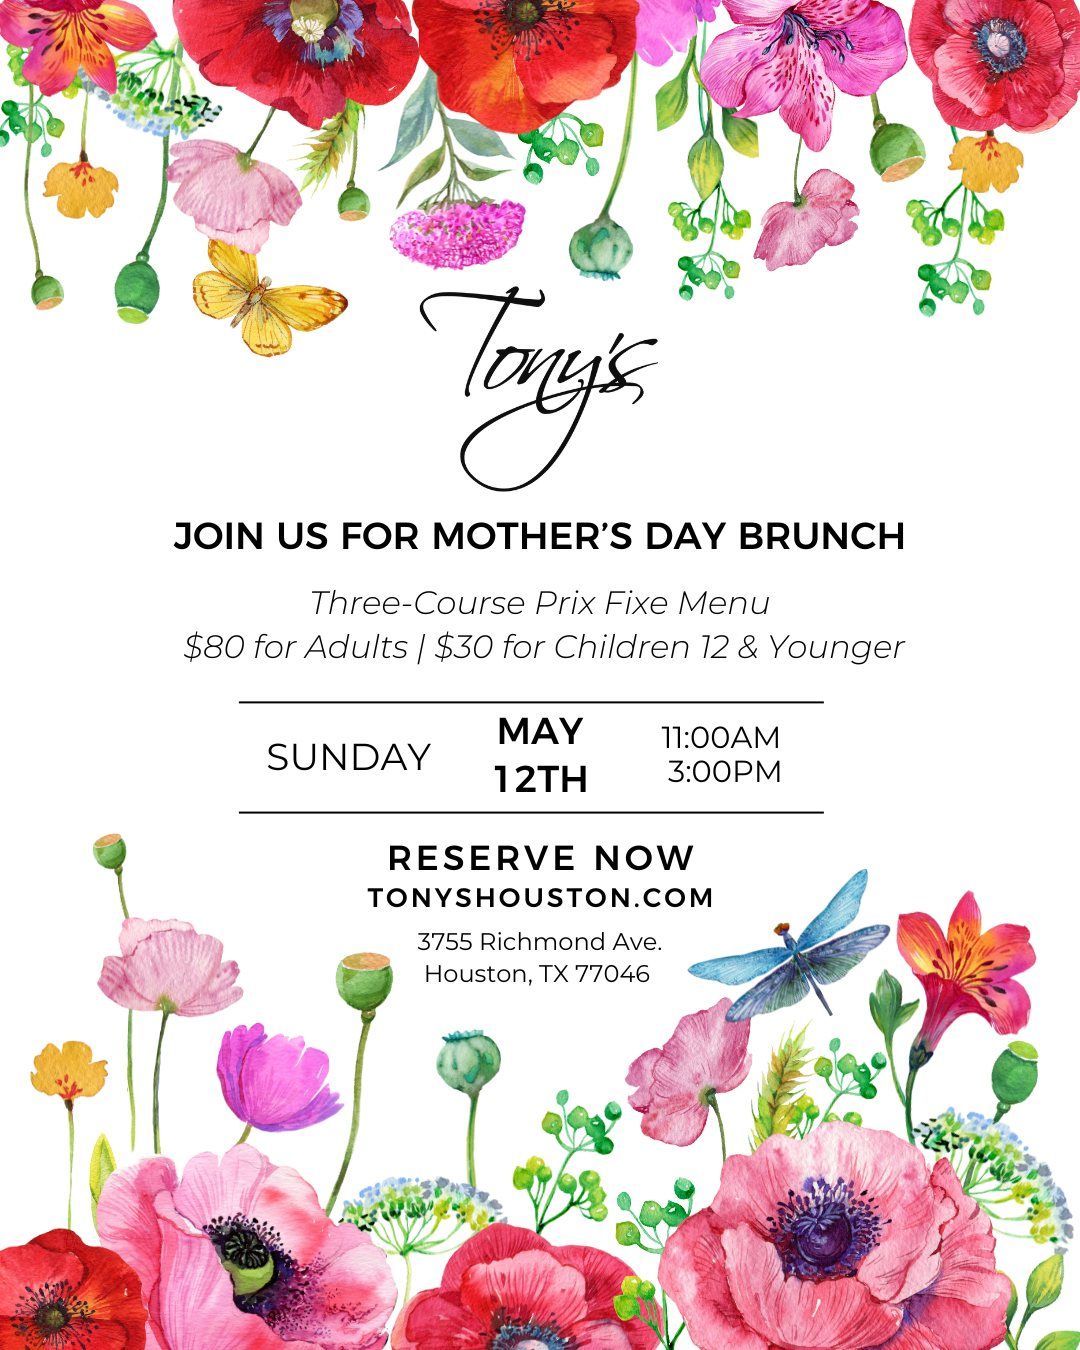 Mother's Day Brunch at Tony's